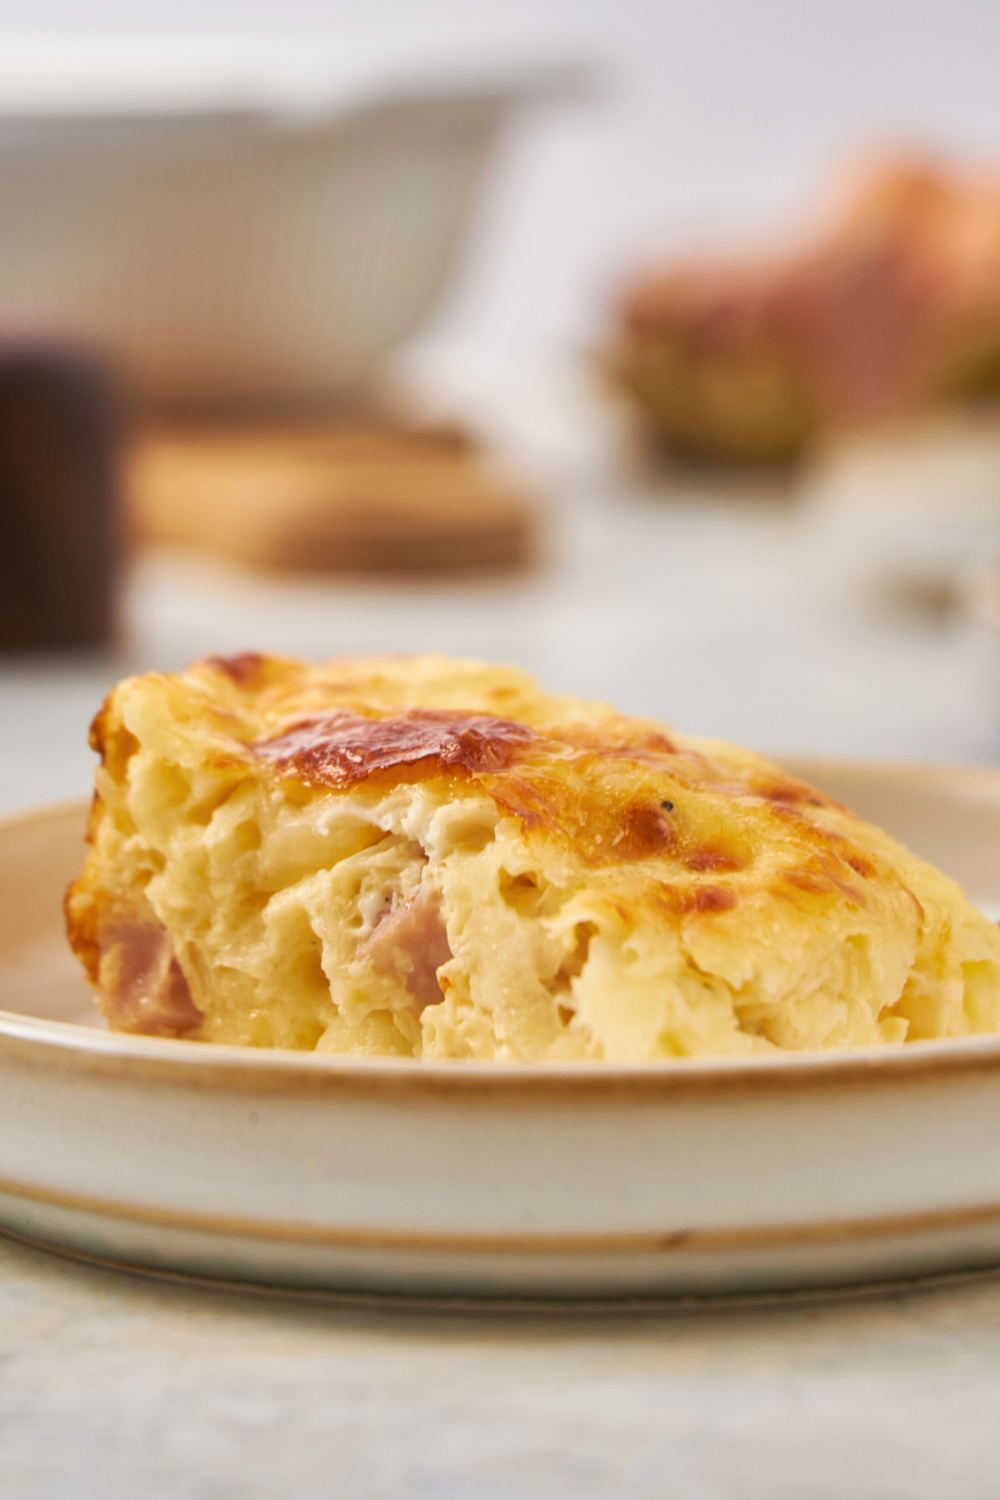 A piece of ham and cheese breakfast casserole on a plate.